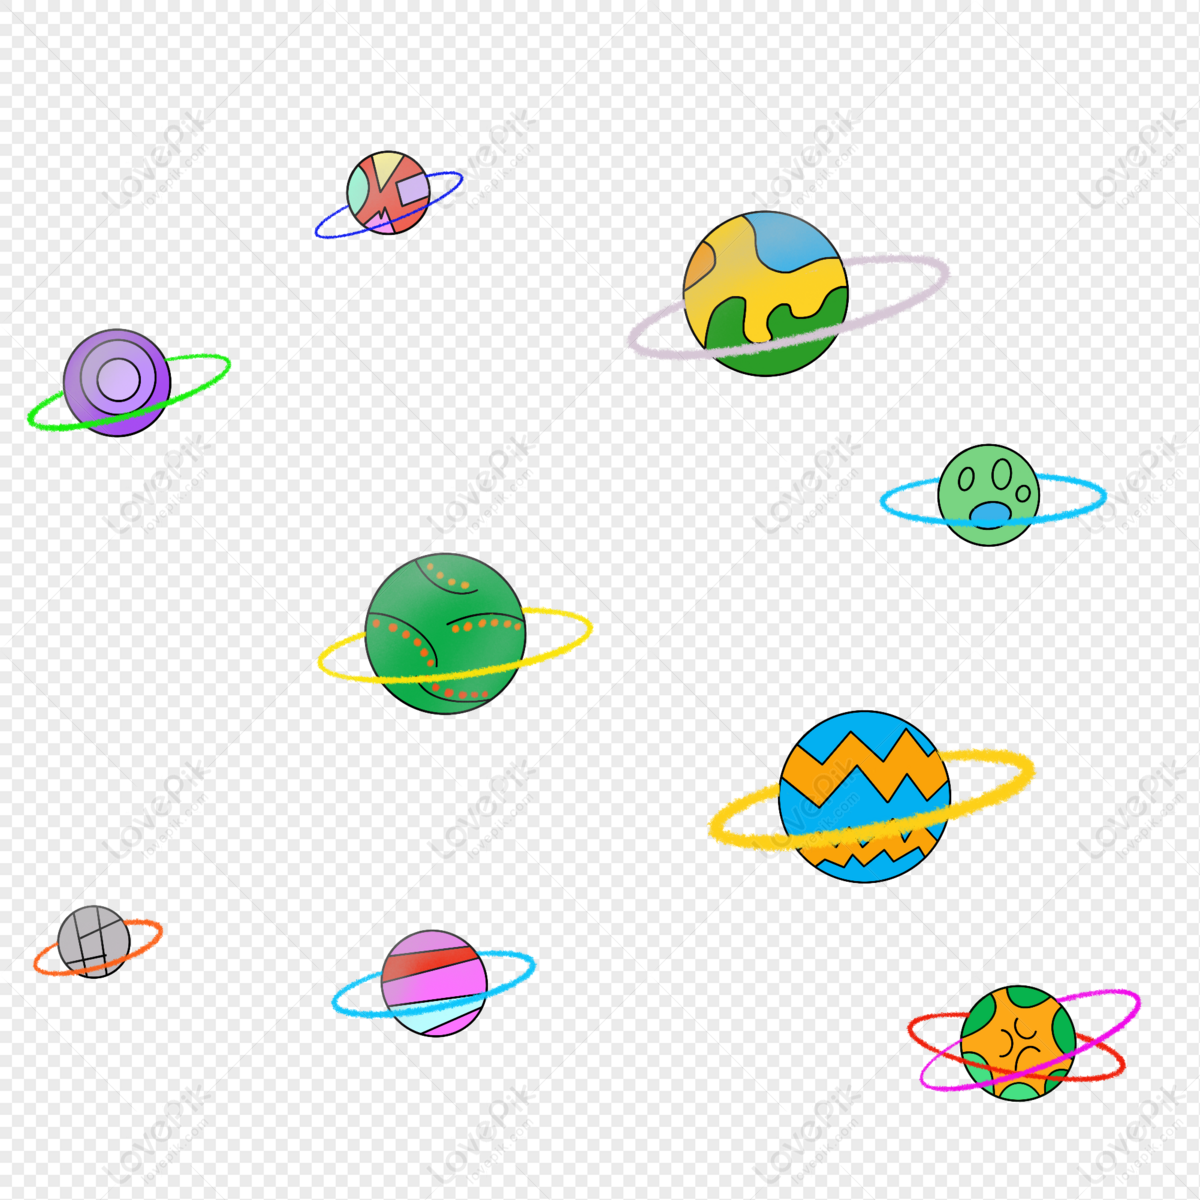 Colored Cute Planet PNG Transparent Background And Clipart Image For Free  Download - Lovepik | 401231760